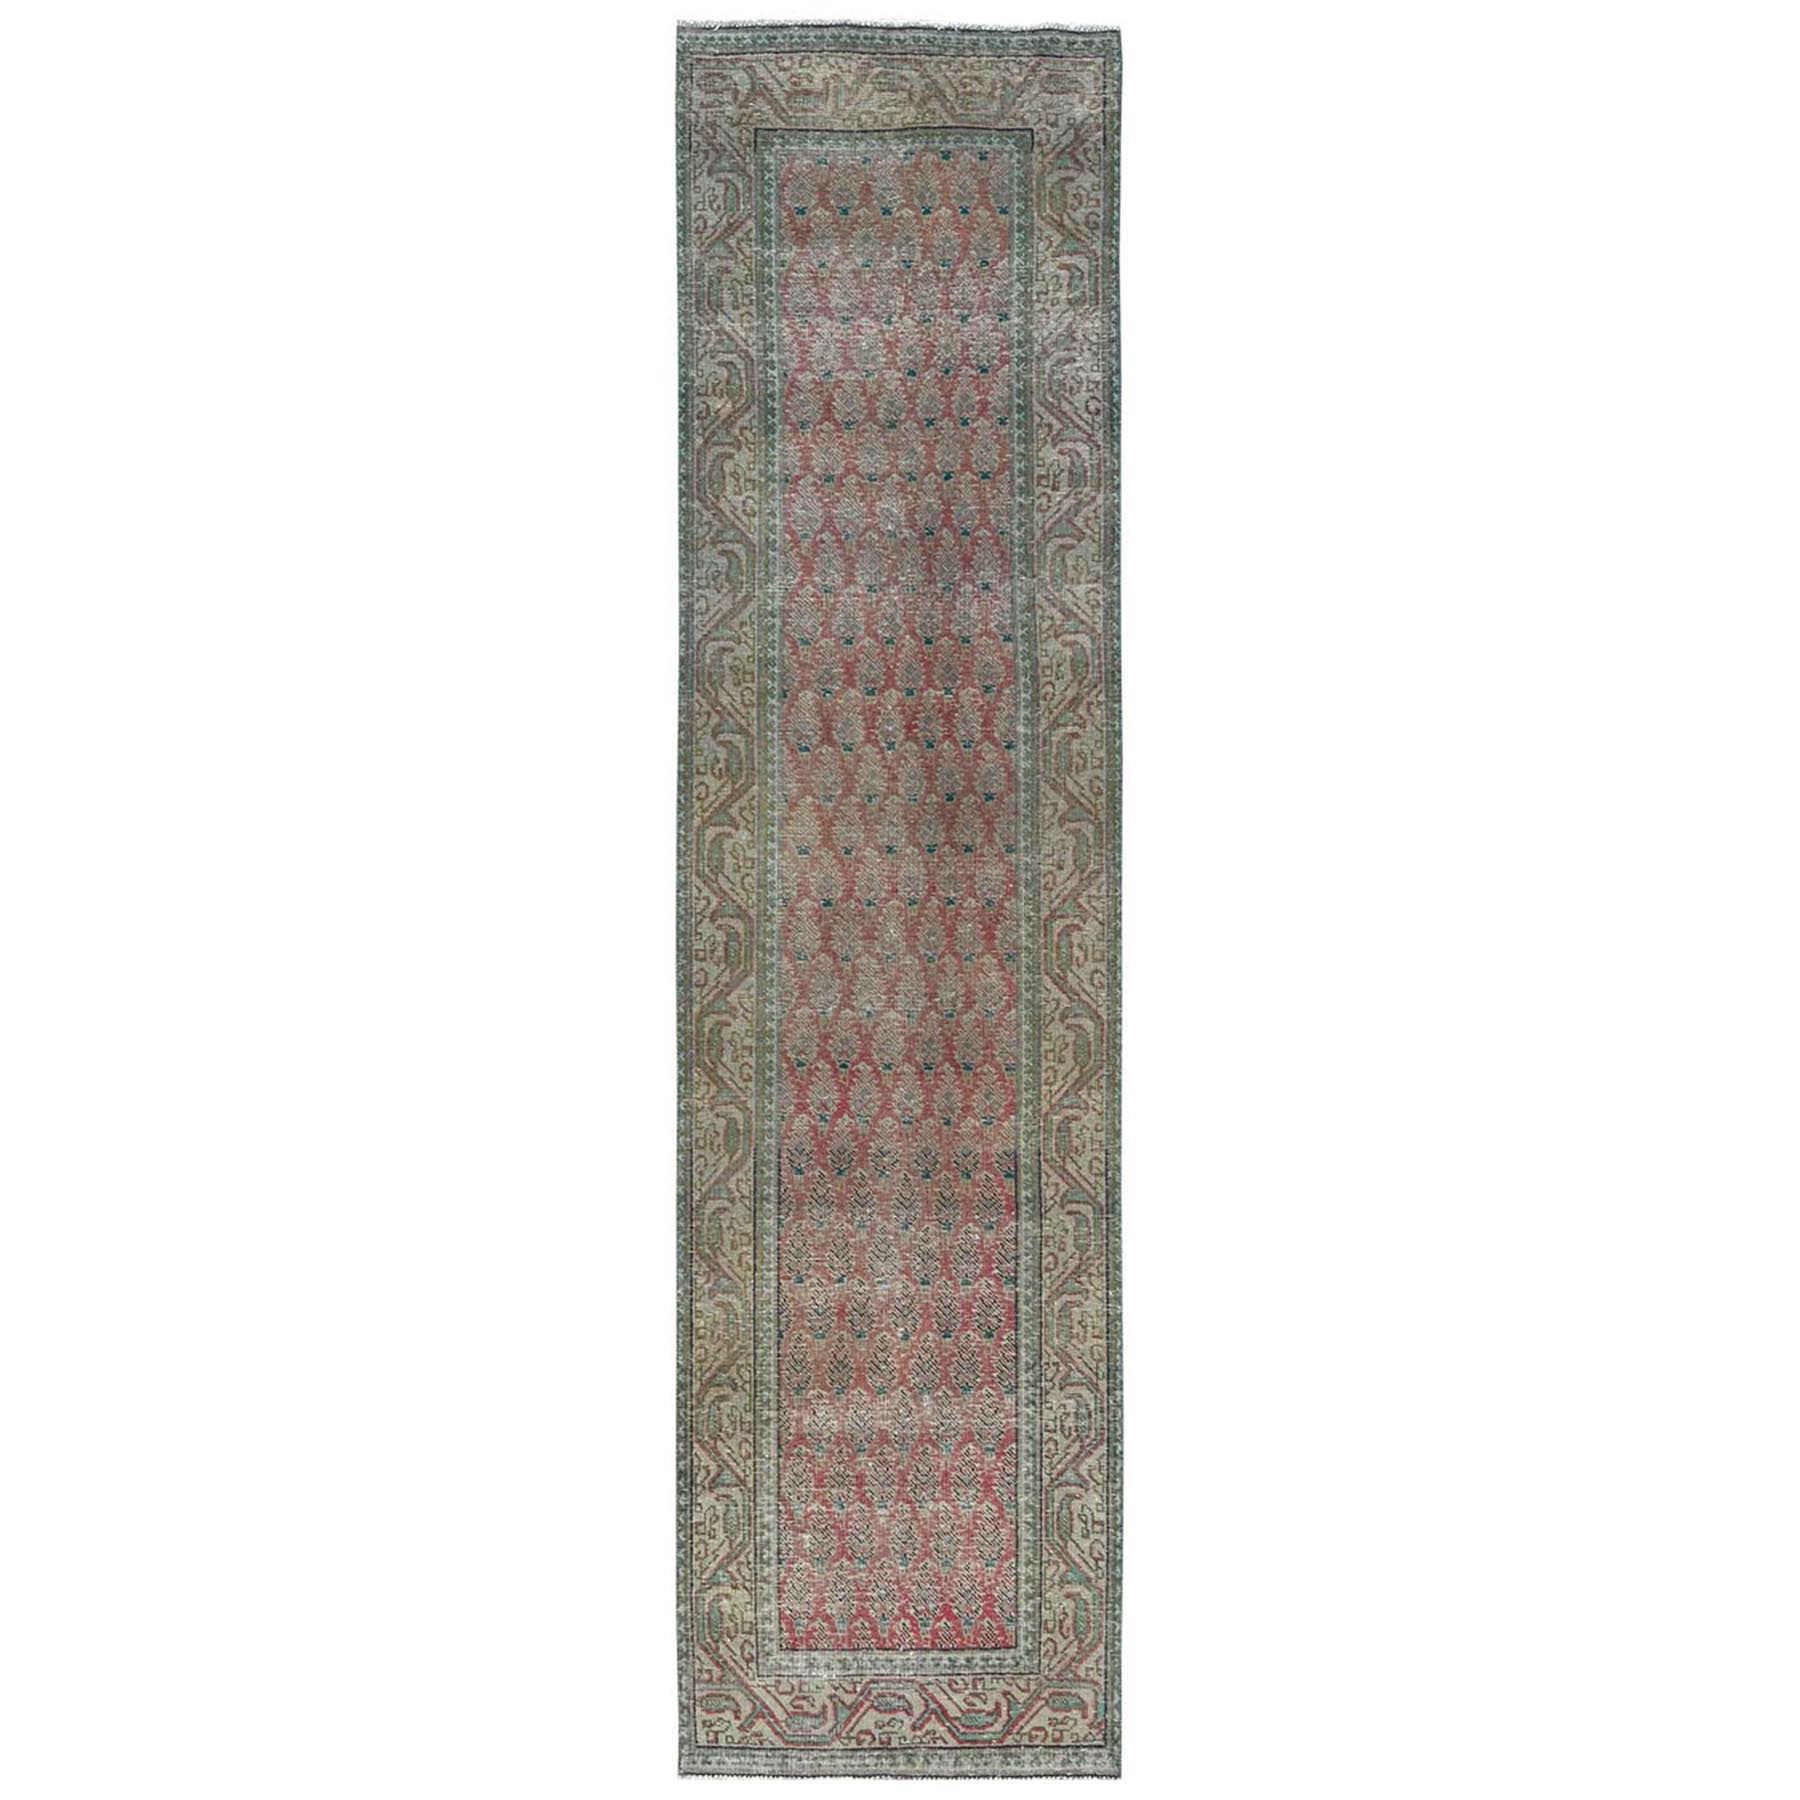 3'1"x12'4" Faded Red, Worn Down Vintage Persian Tabriz with Small Tree Repetitive Design, Hand Woven, Distressed Pure Wool Runner Oriental Rug 